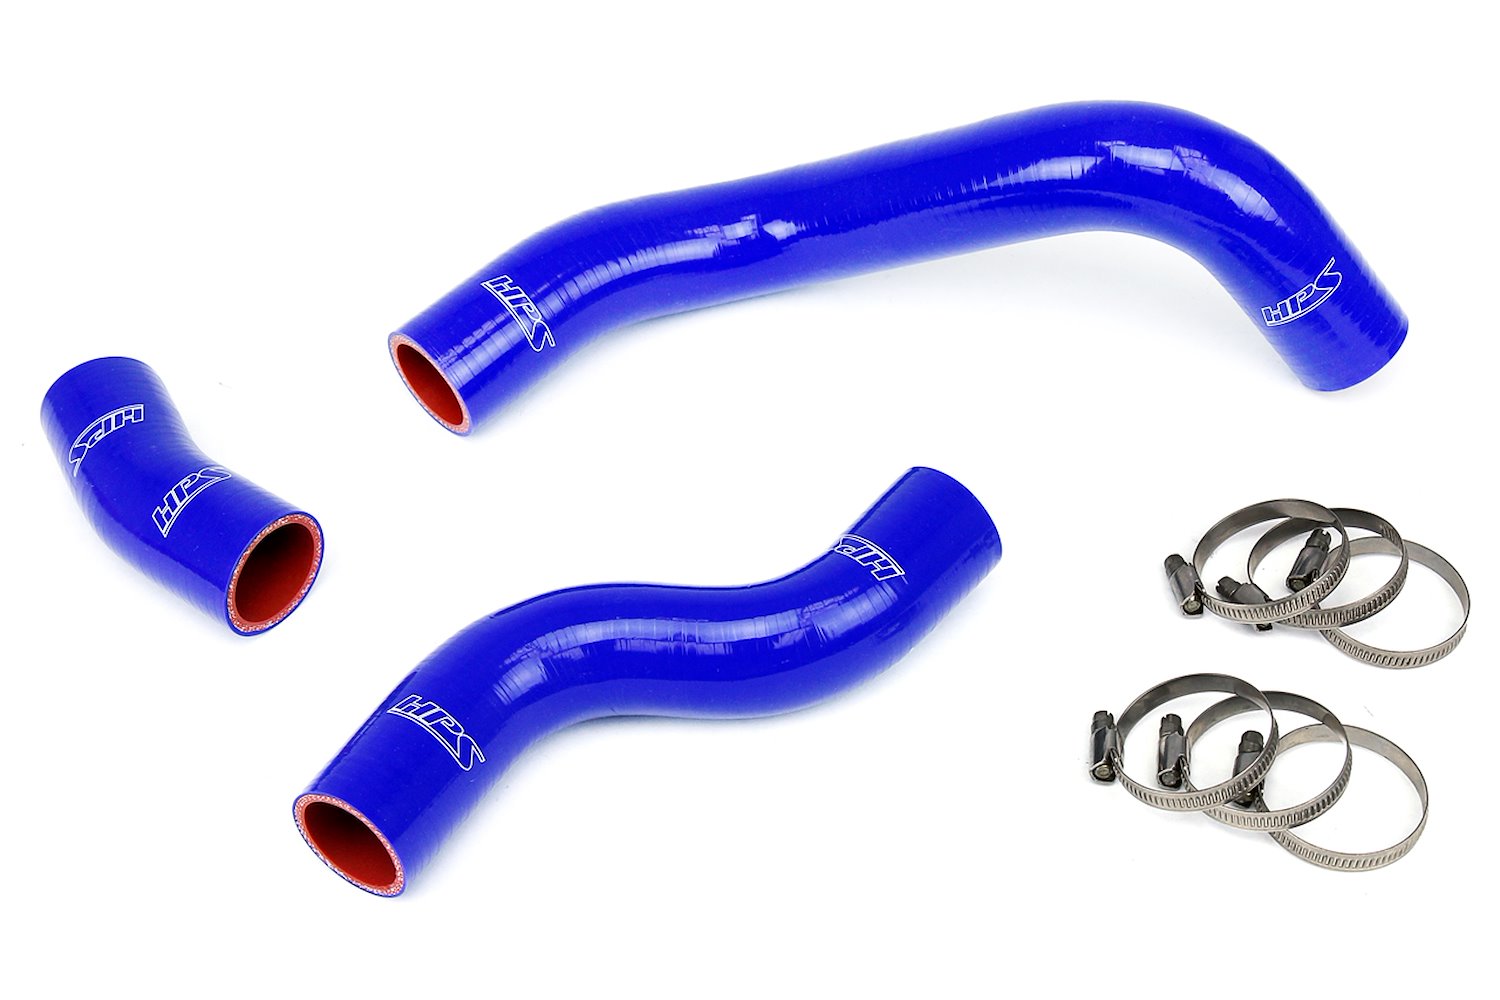 57-1226-BLUE Radiator Hose Kit, High-Temp 3-Ply Reinforced Silicone, Replace OEM Rubber Radiator Coolant Hoses